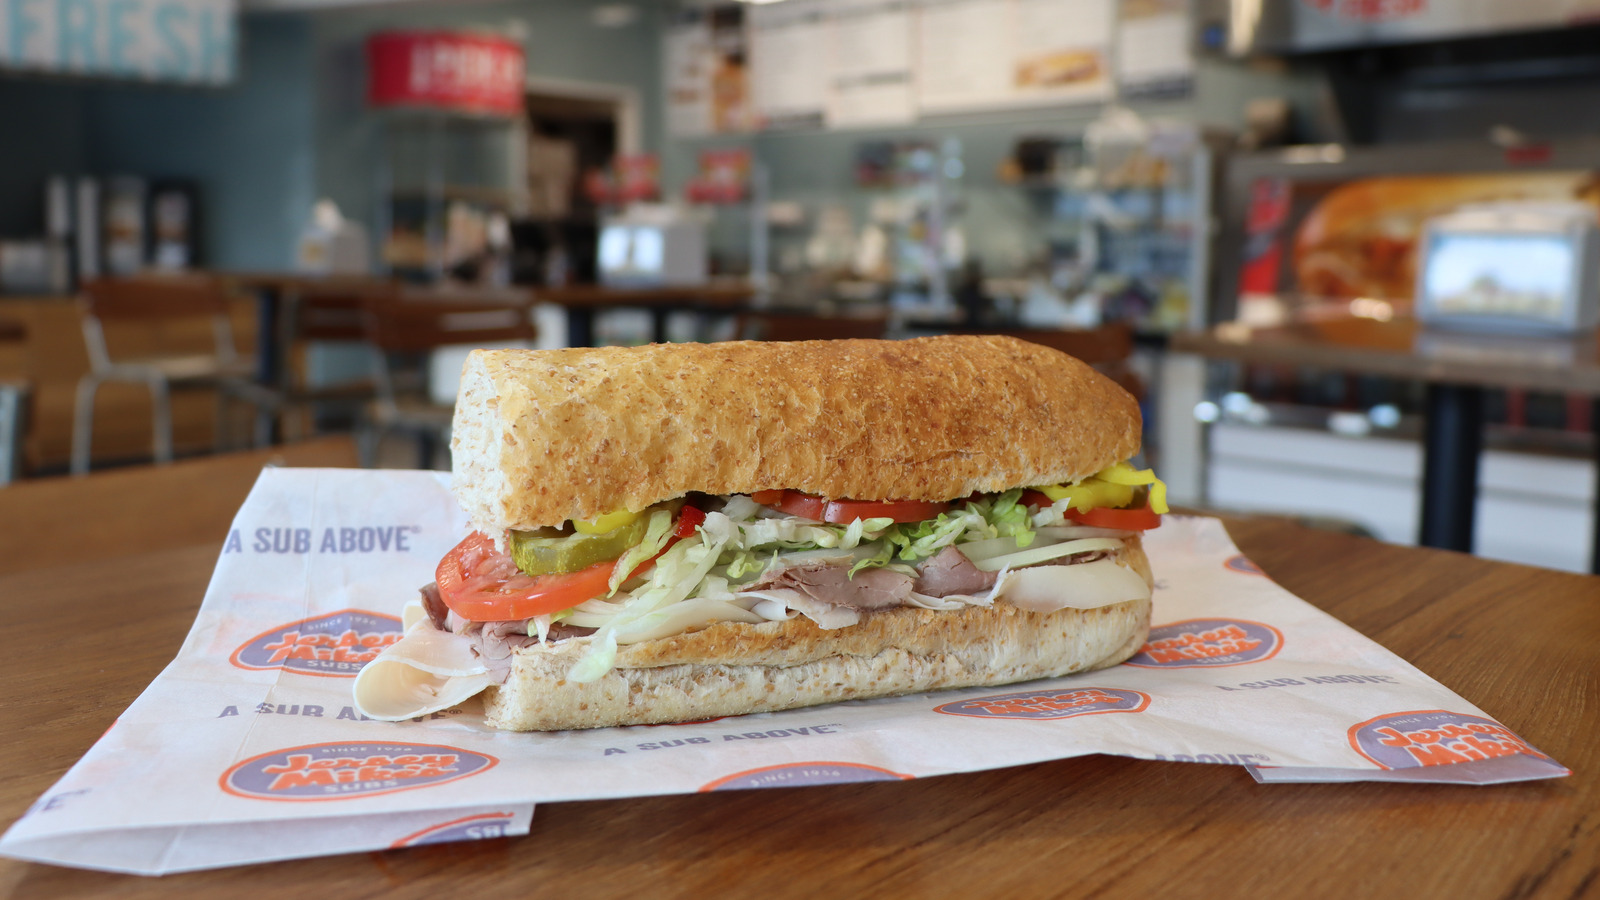 Jersey Mike’s Subs Rides Wave Of Franchisee Growth To Enter 50th State – Tasting Table